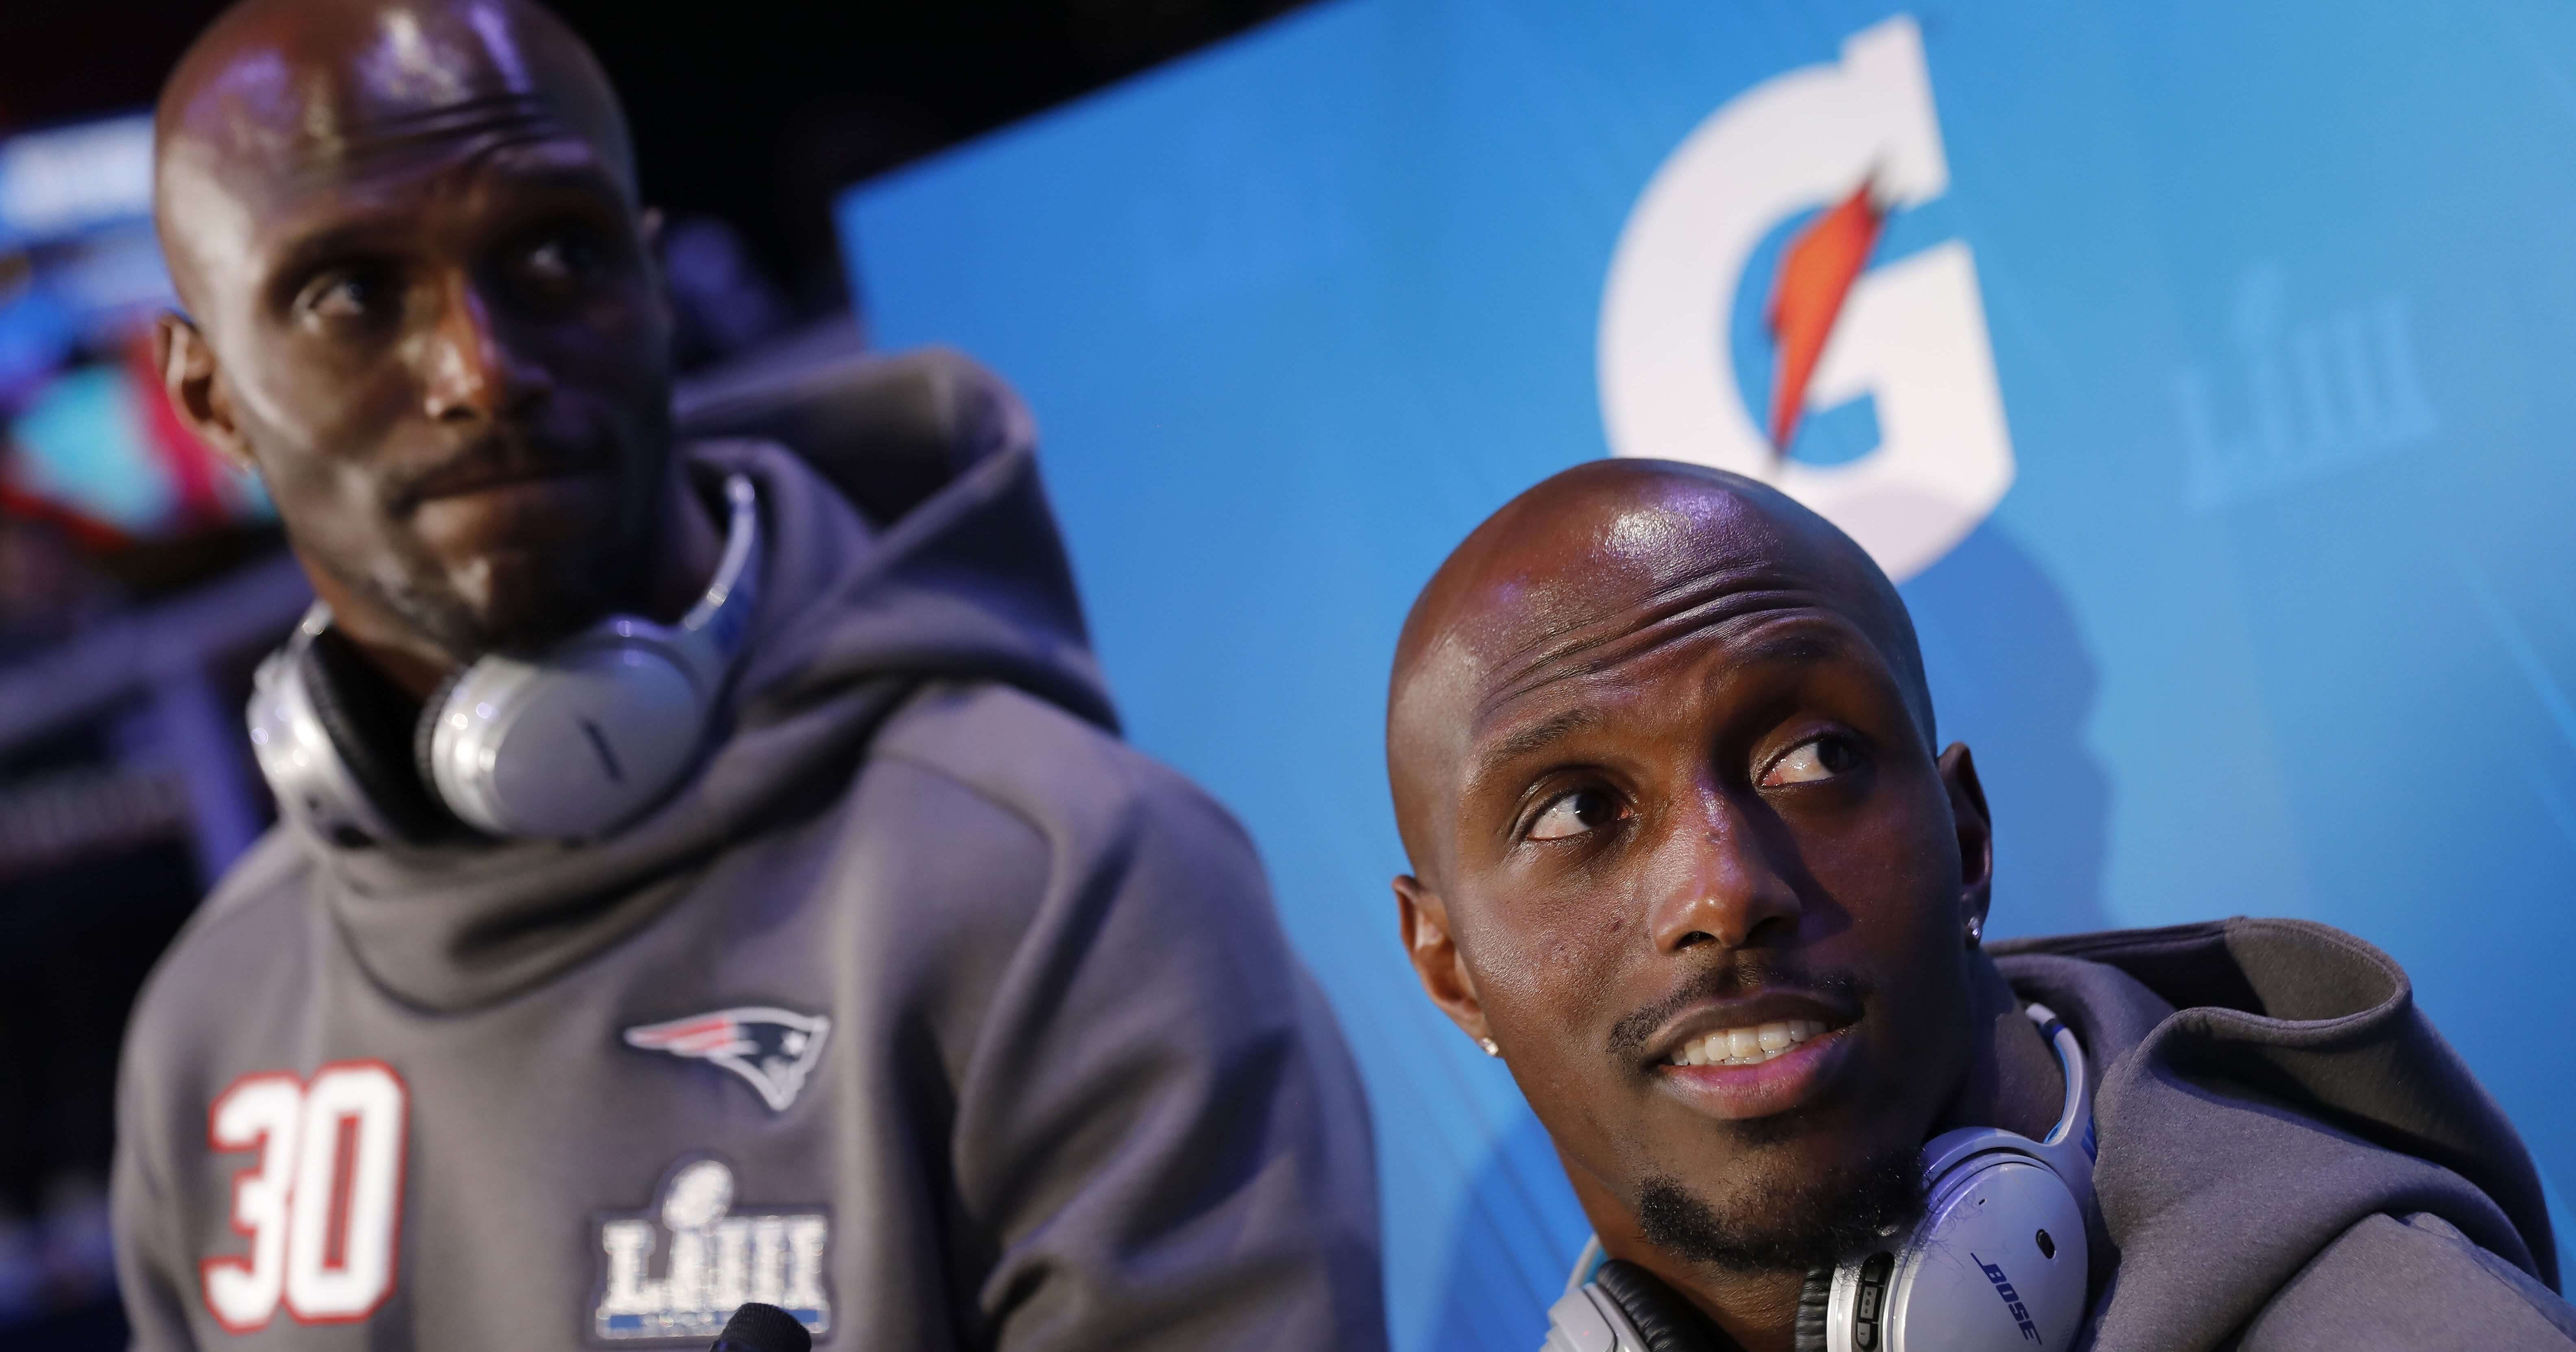 The New England Patriots' Jason McCourty, left, and Devin McCourty answer questions during Super Bowl LIII Opening Night on Monday in Atlanta.